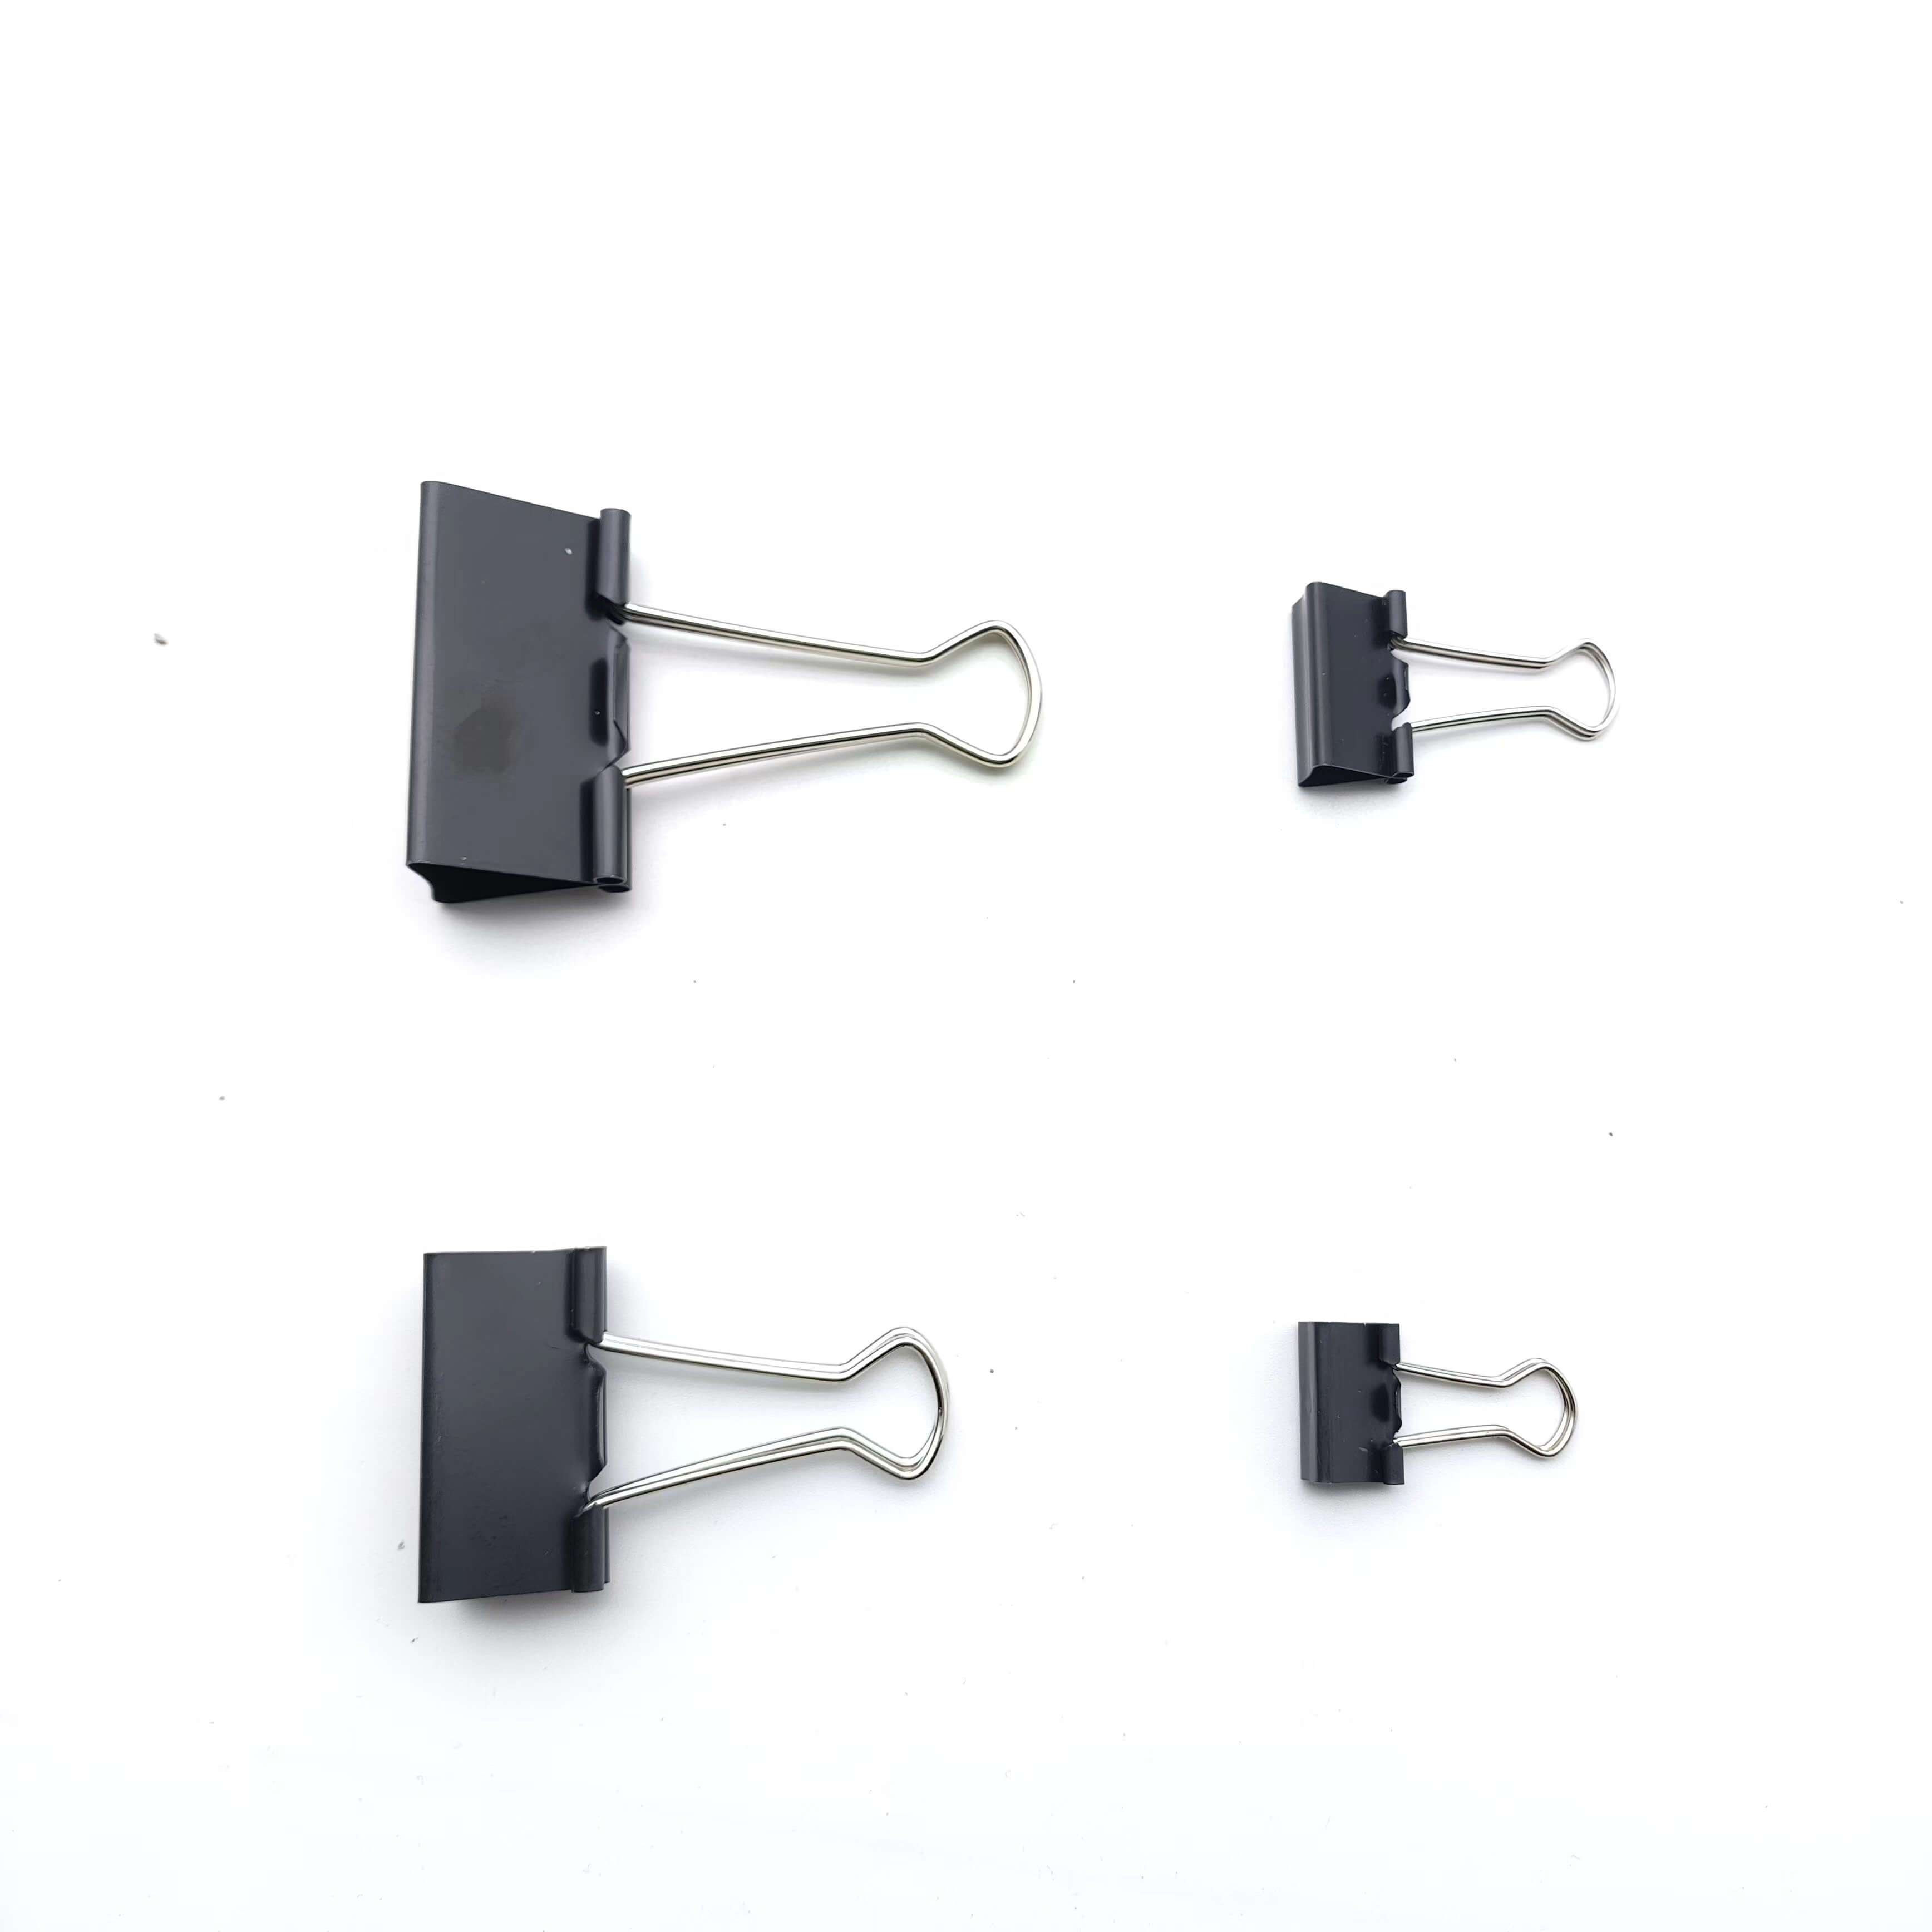 Binder Clips - Foldback Clips 6 Sizes Paper Clips Stationary Clamp